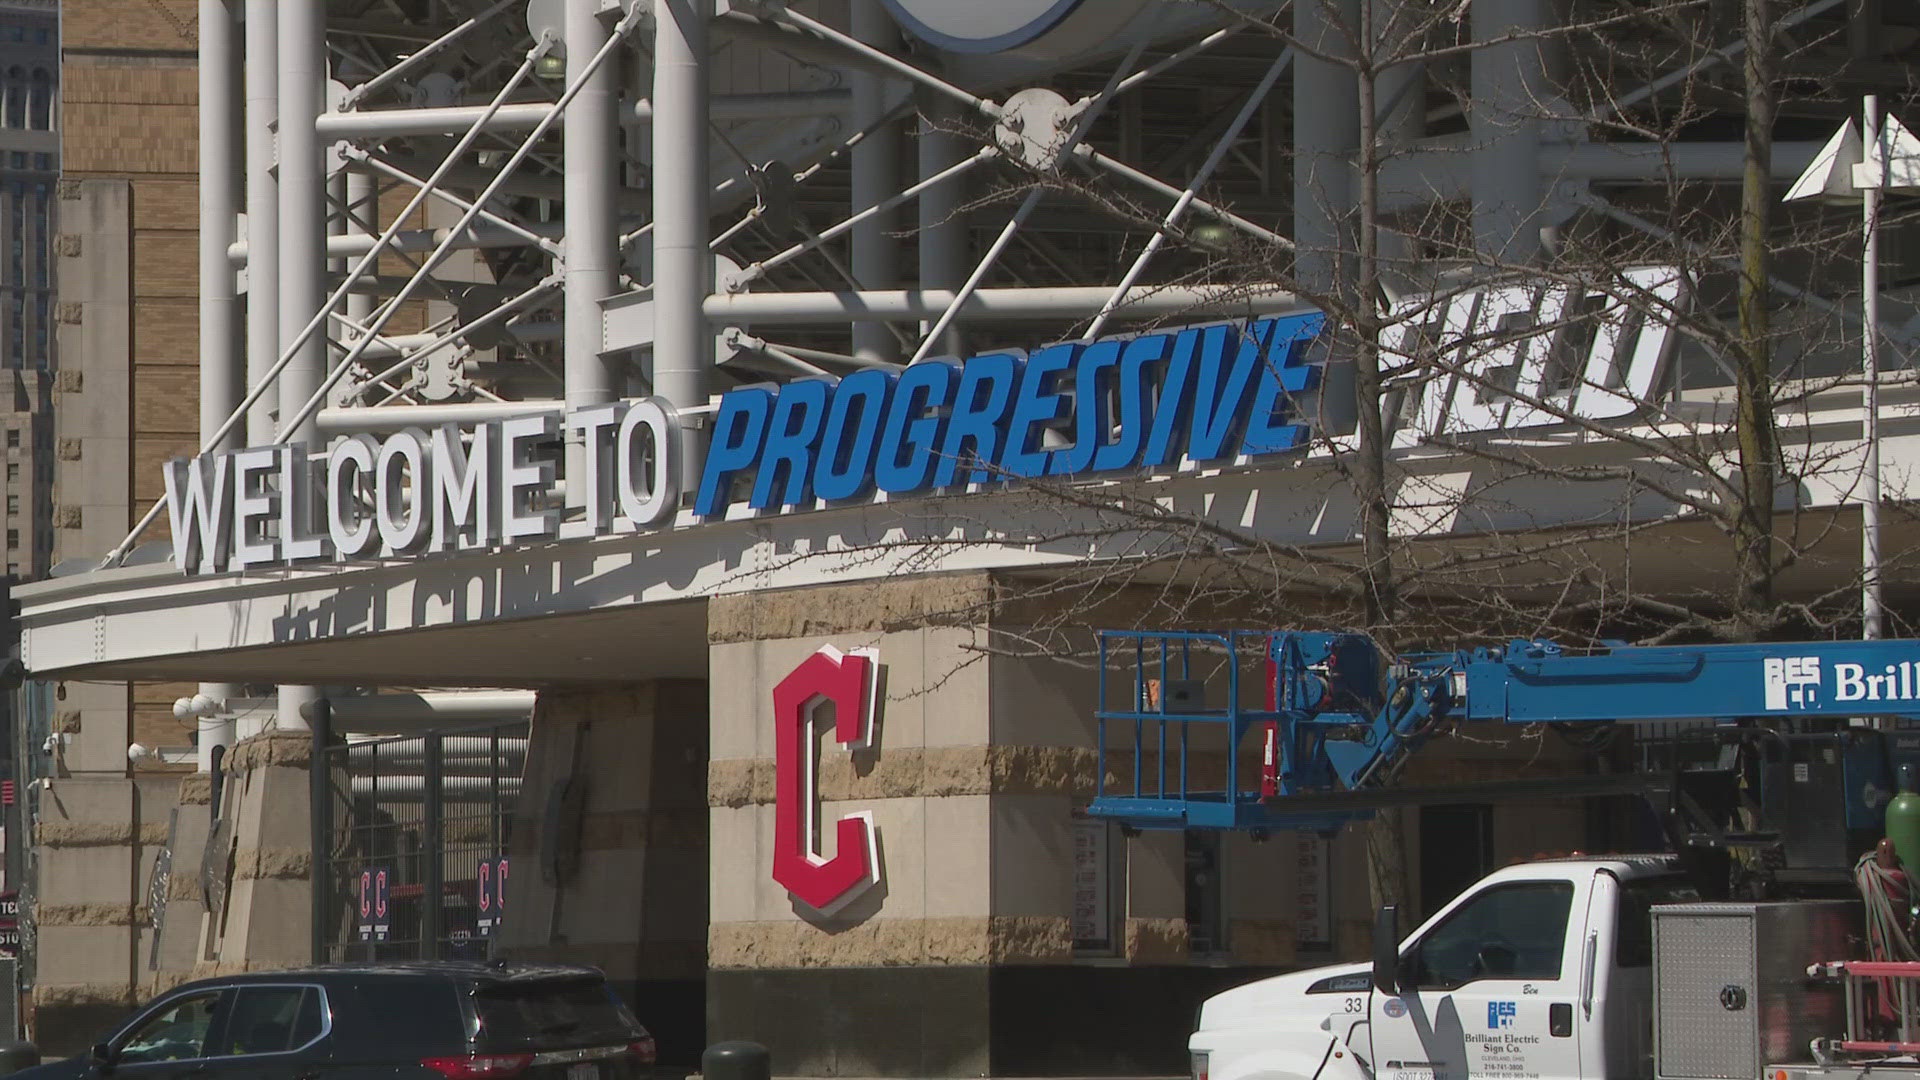 The ballpark, opened in 1994 as Jacobs Field, has been known as Progressive Field since 2008.